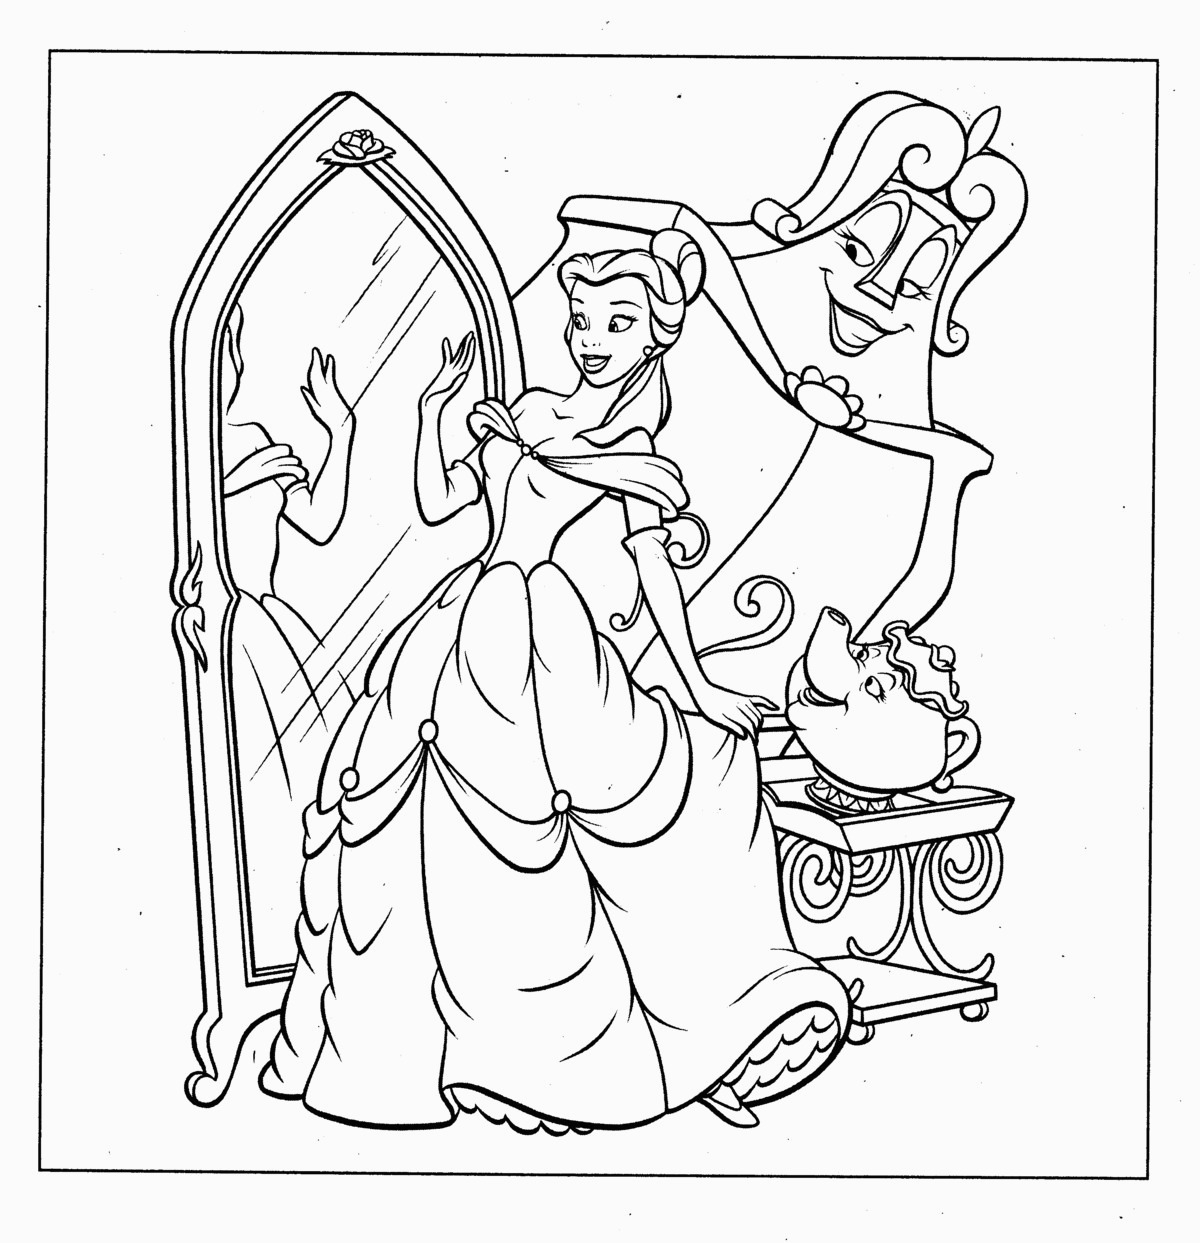 Disney Princess Coloring Pages Printable Free Printable Disney Princess Coloring Pages For Kids For Disney